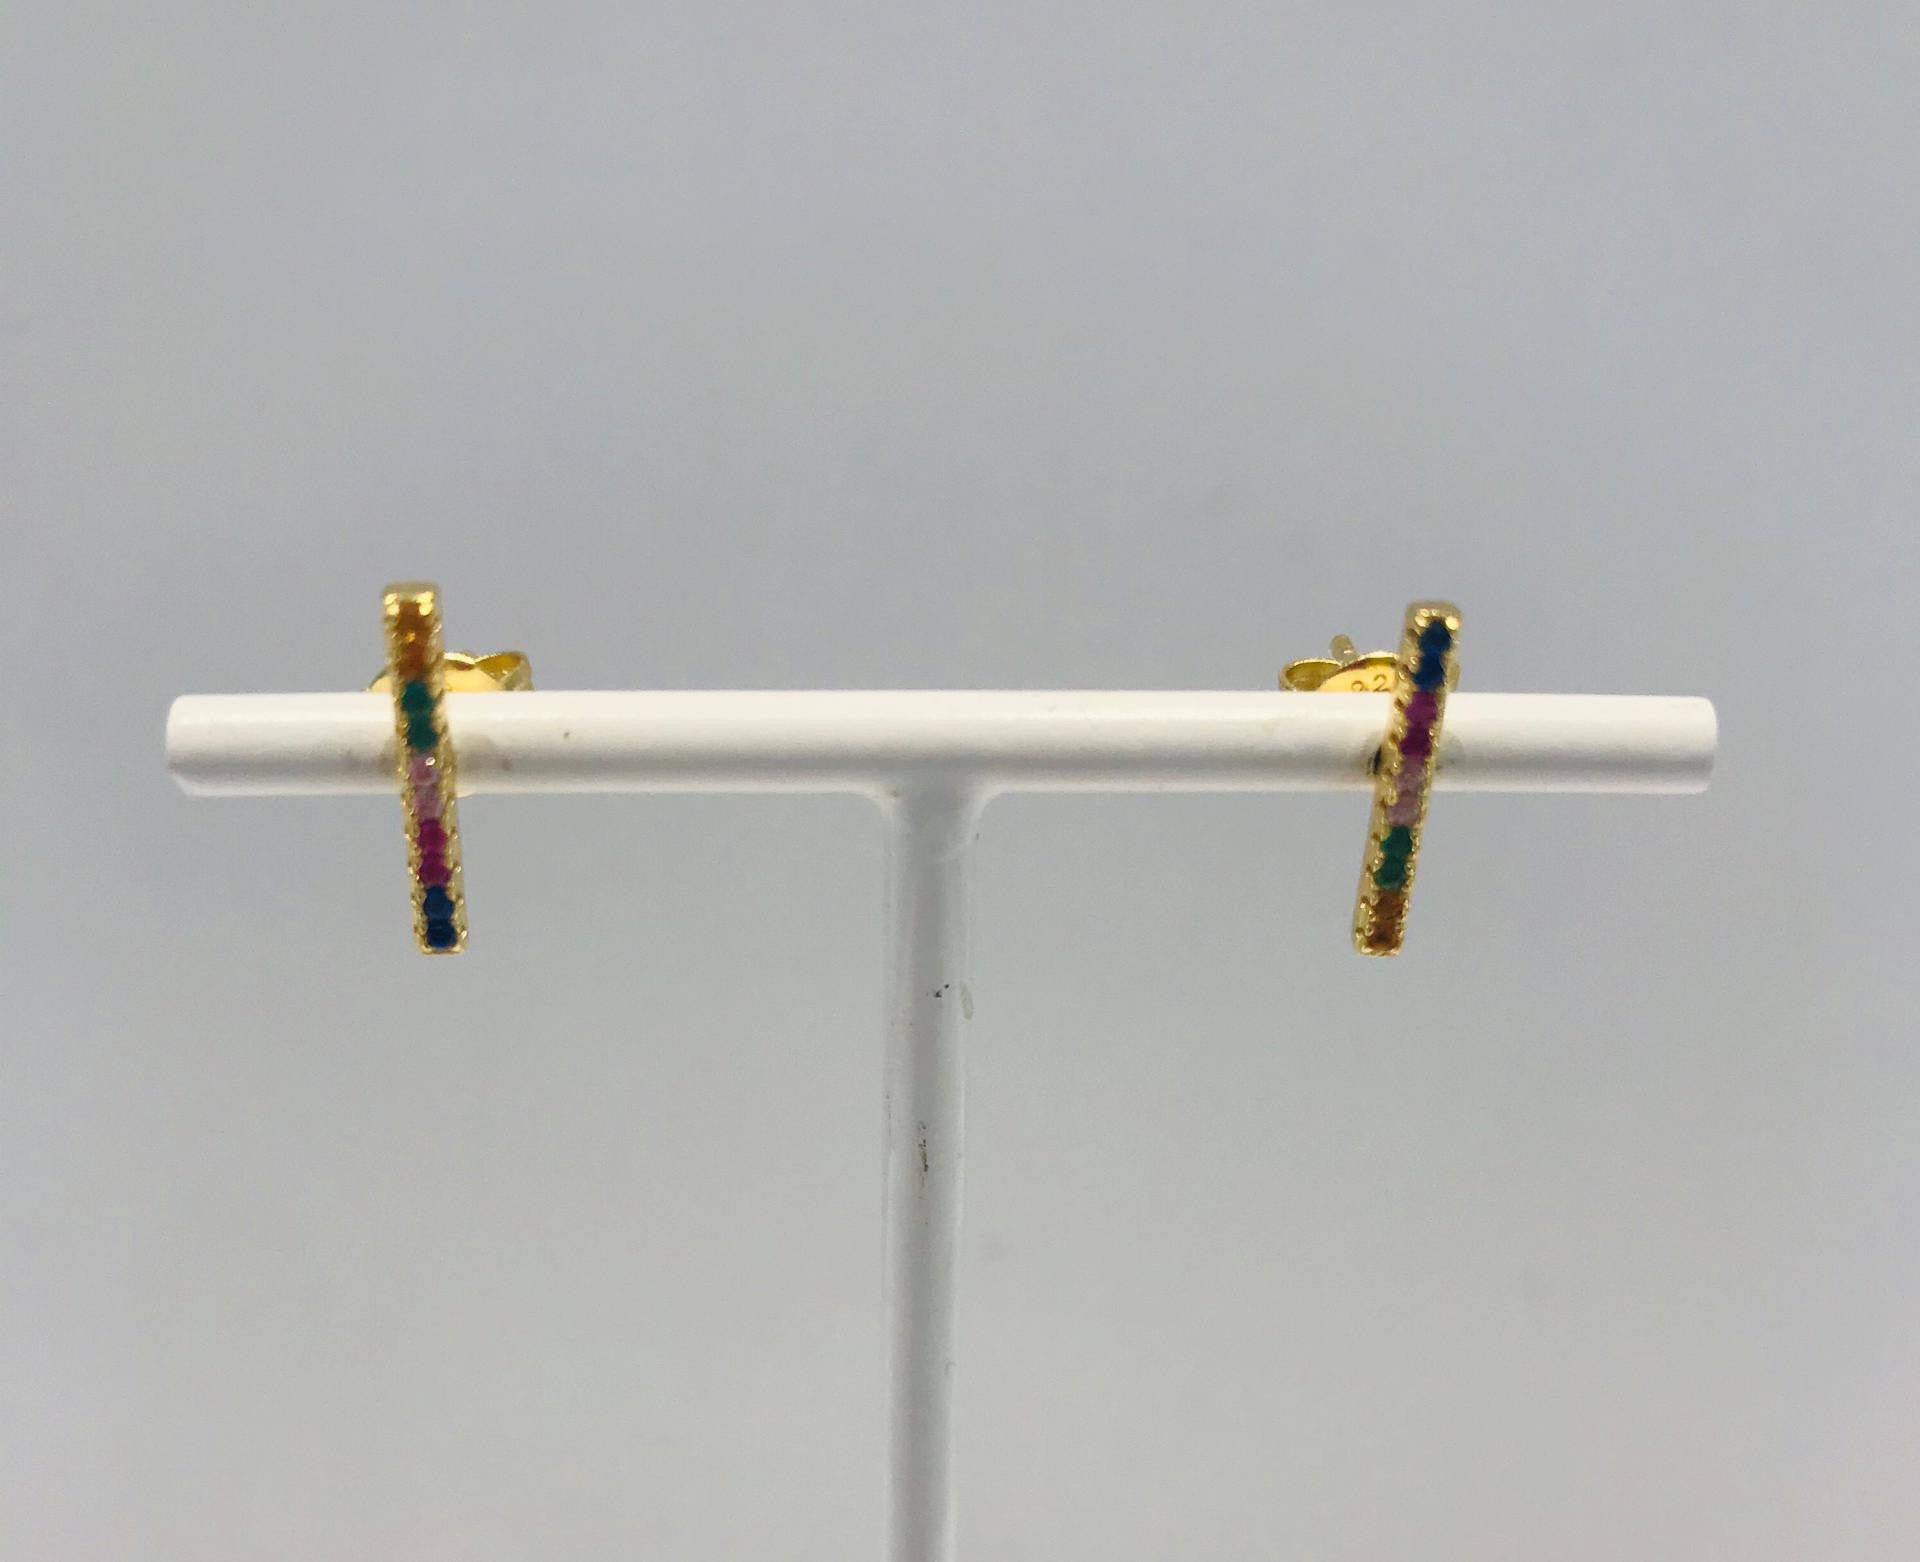 Gold plated bar studs with crystals by SAM&CEL.